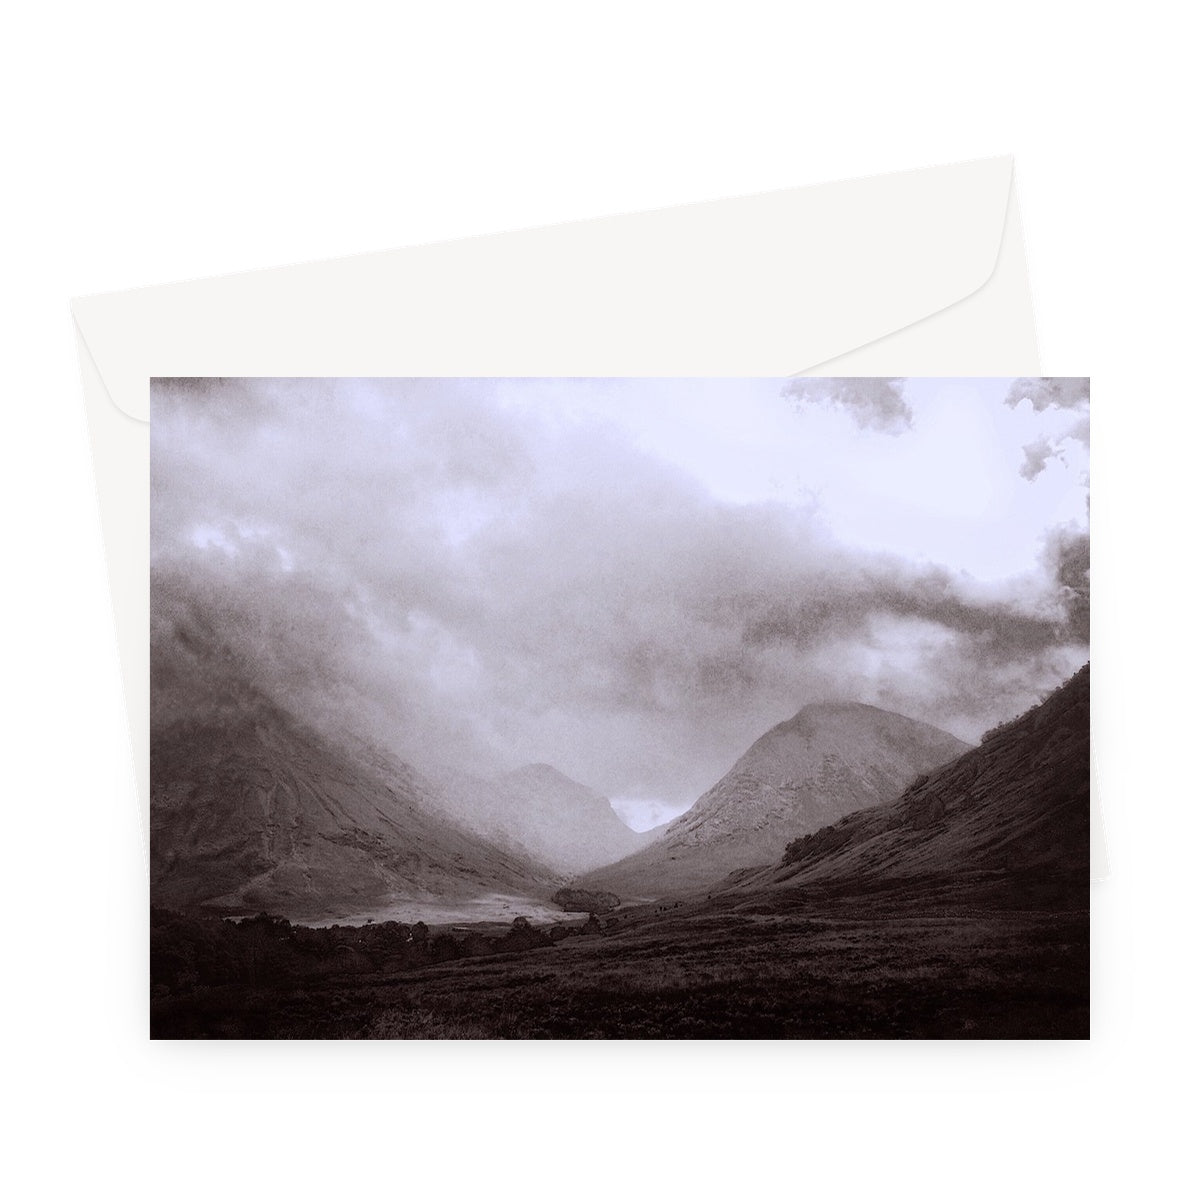 Glencoe Mist Art Gifts Greeting Card-Greetings Cards-Glencoe Art Gallery-A5 Landscape-1 Card-Paintings, Prints, Homeware, Art Gifts From Scotland By Scottish Artist Kevin Hunter